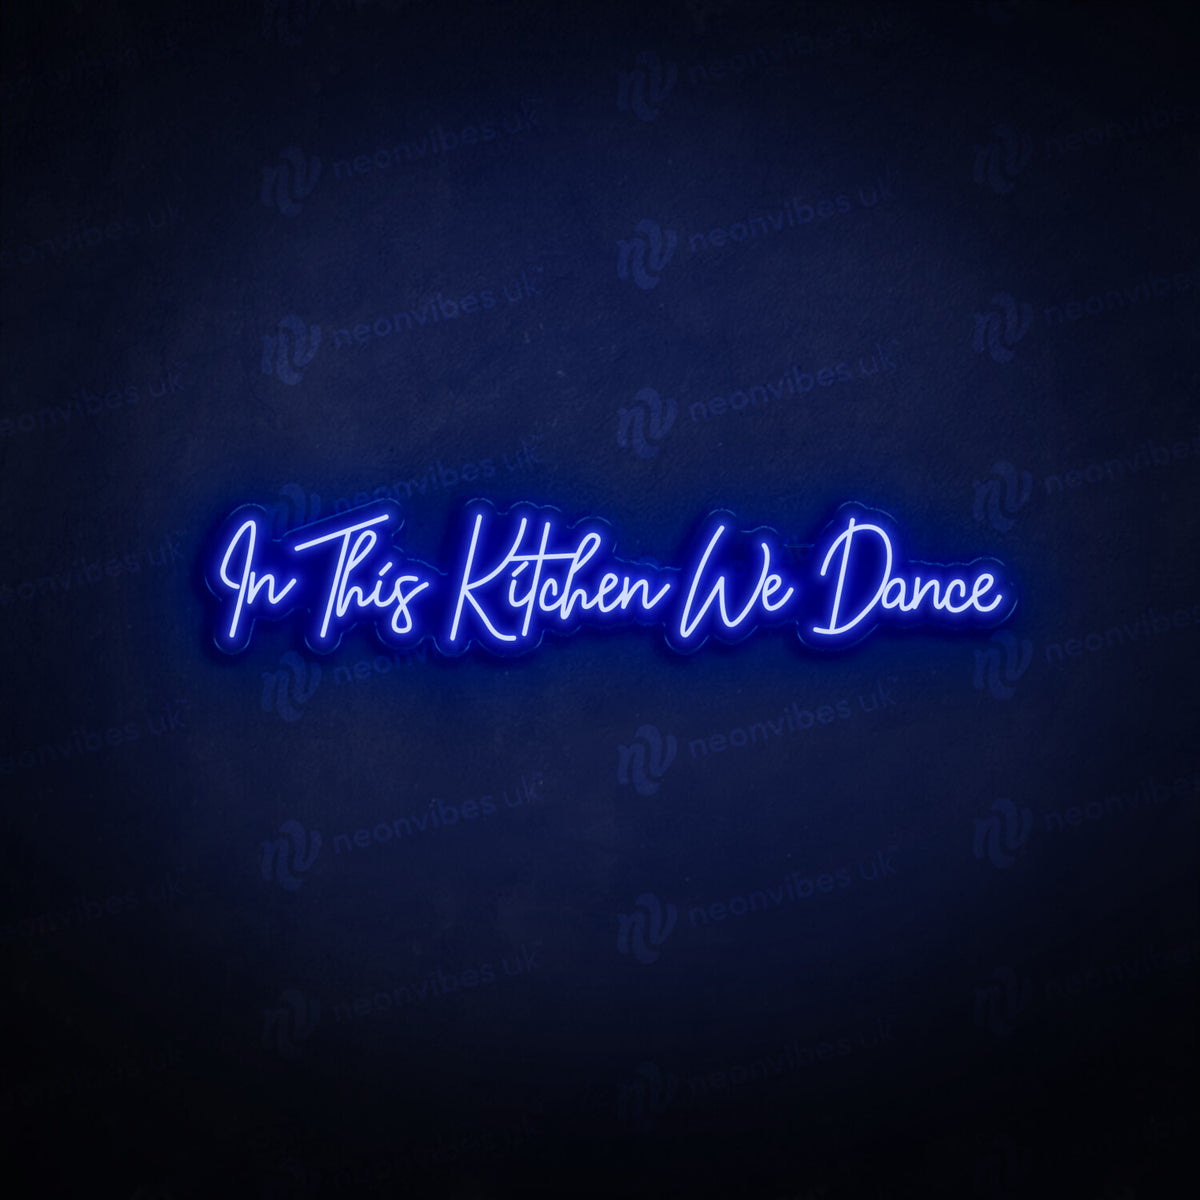 In this kitchen we dance neon sign